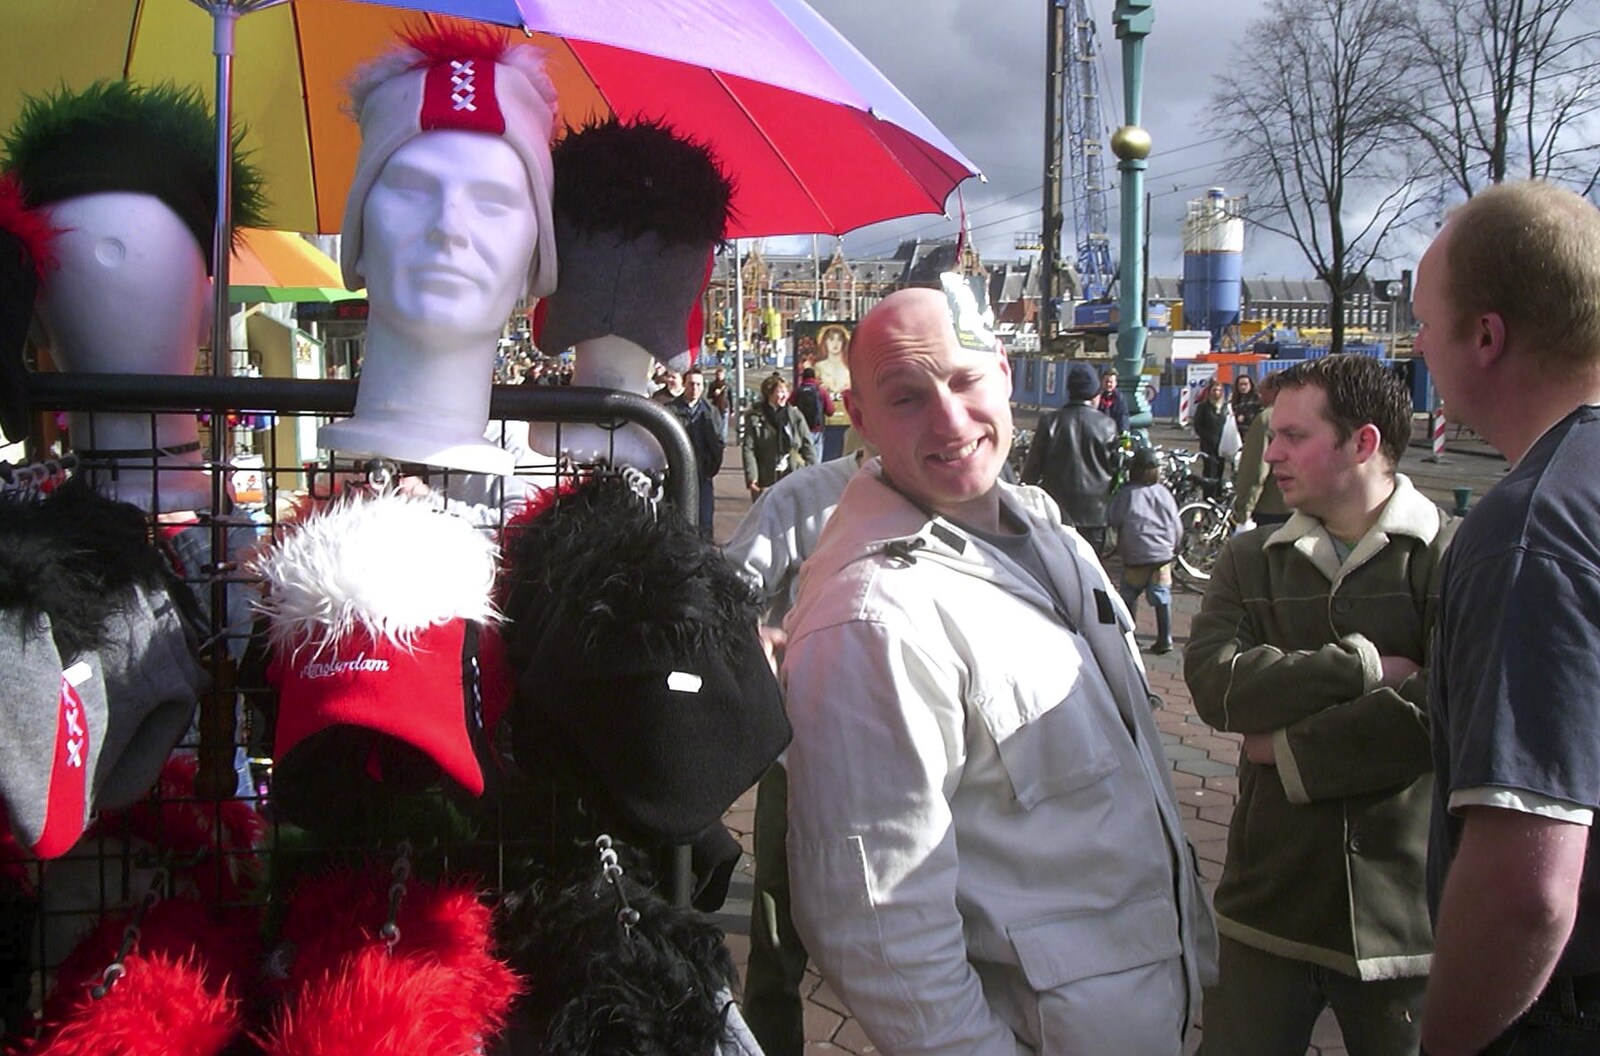 Gov looks at hairy hats from Anne Frank, Markets and Mikey-P's Stag Do, Amsterdam, Netherlands - 6th March 2004